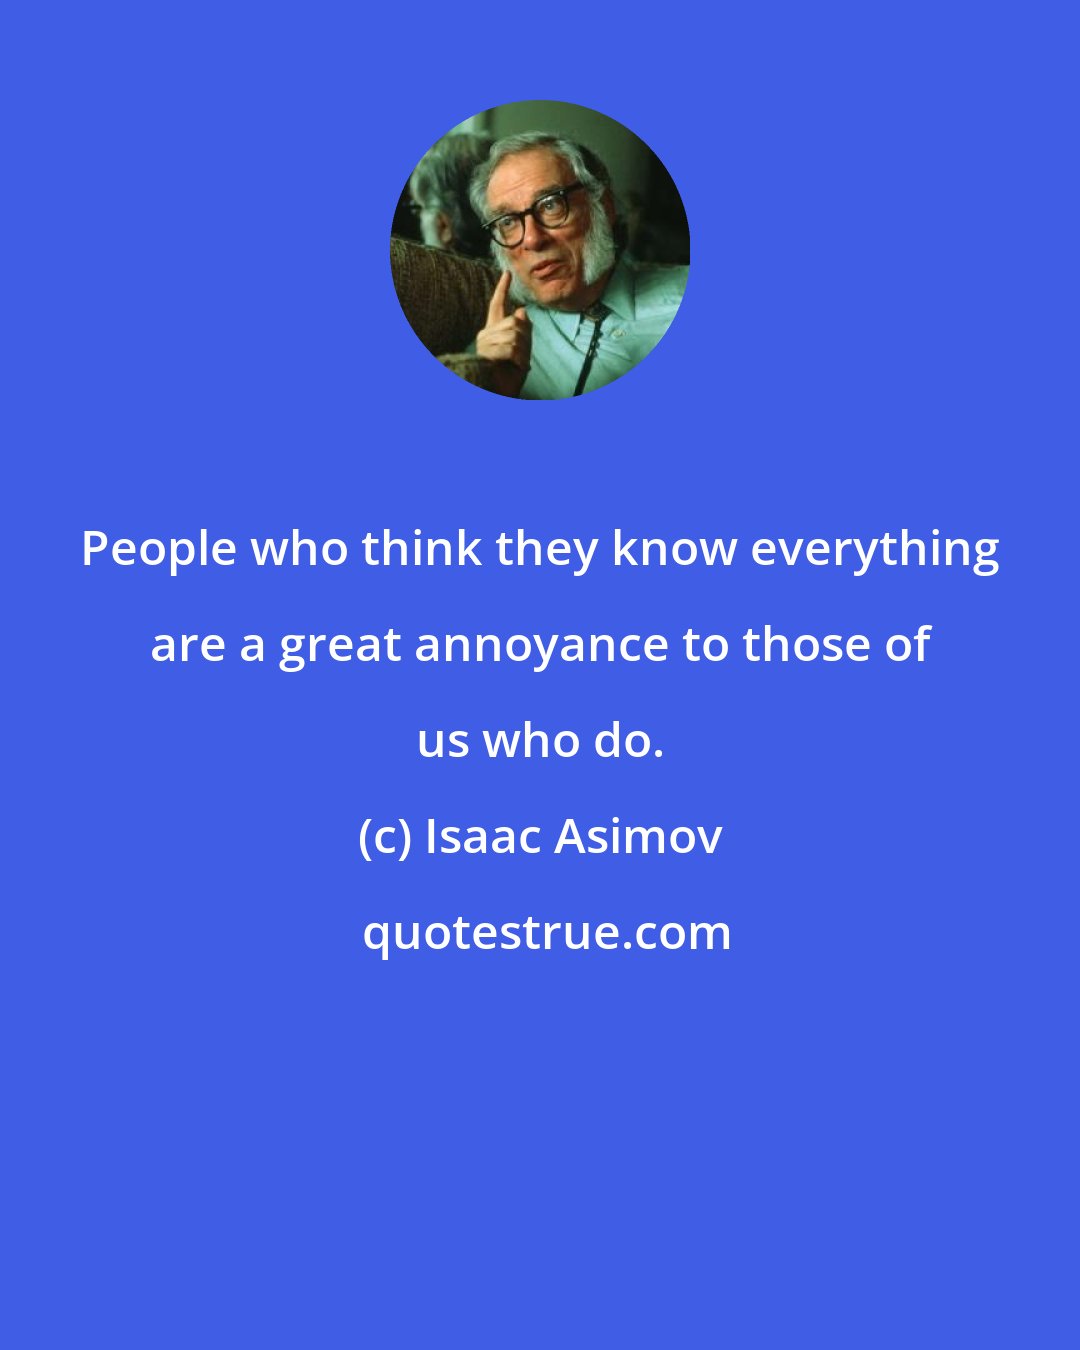 Isaac Asimov: People who think they know everything are a great annoyance to those of us who do.